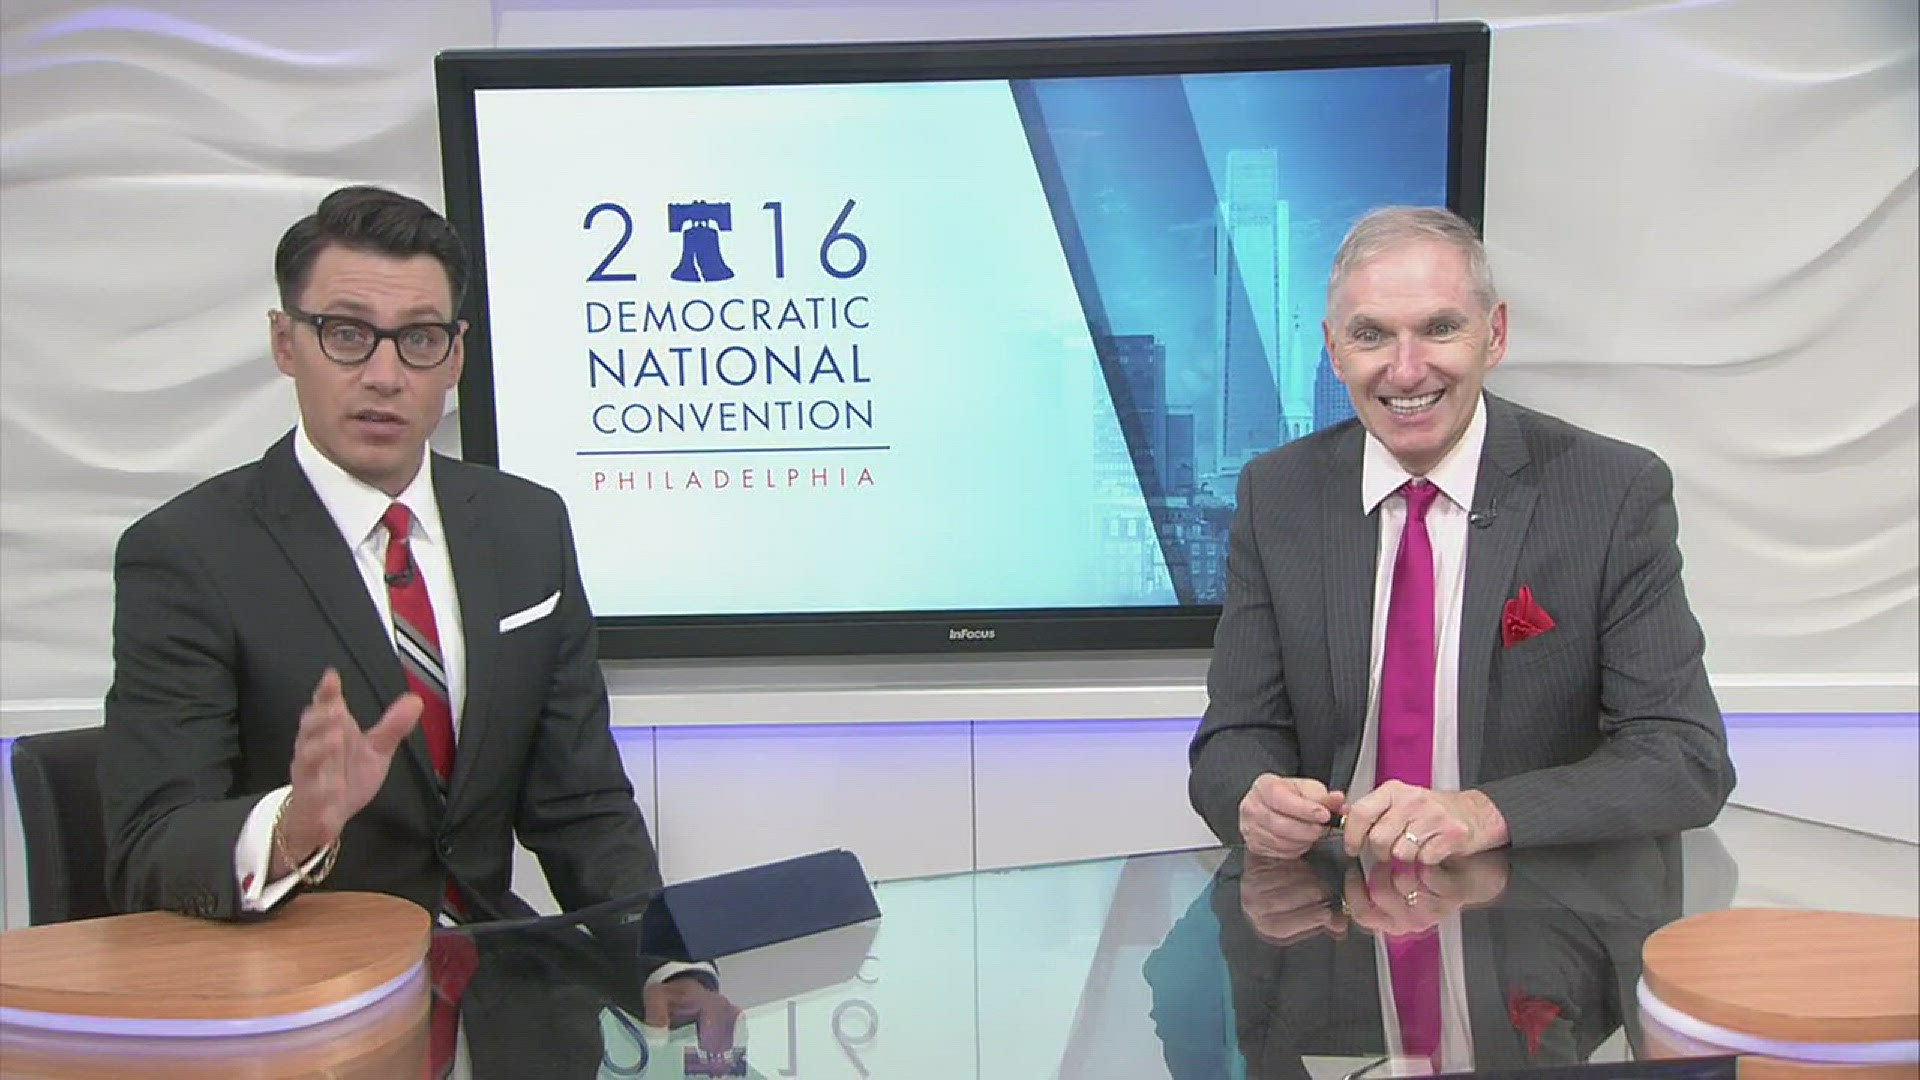 Political analyst David Schultz gives a preview of what to expect at this week's DNC